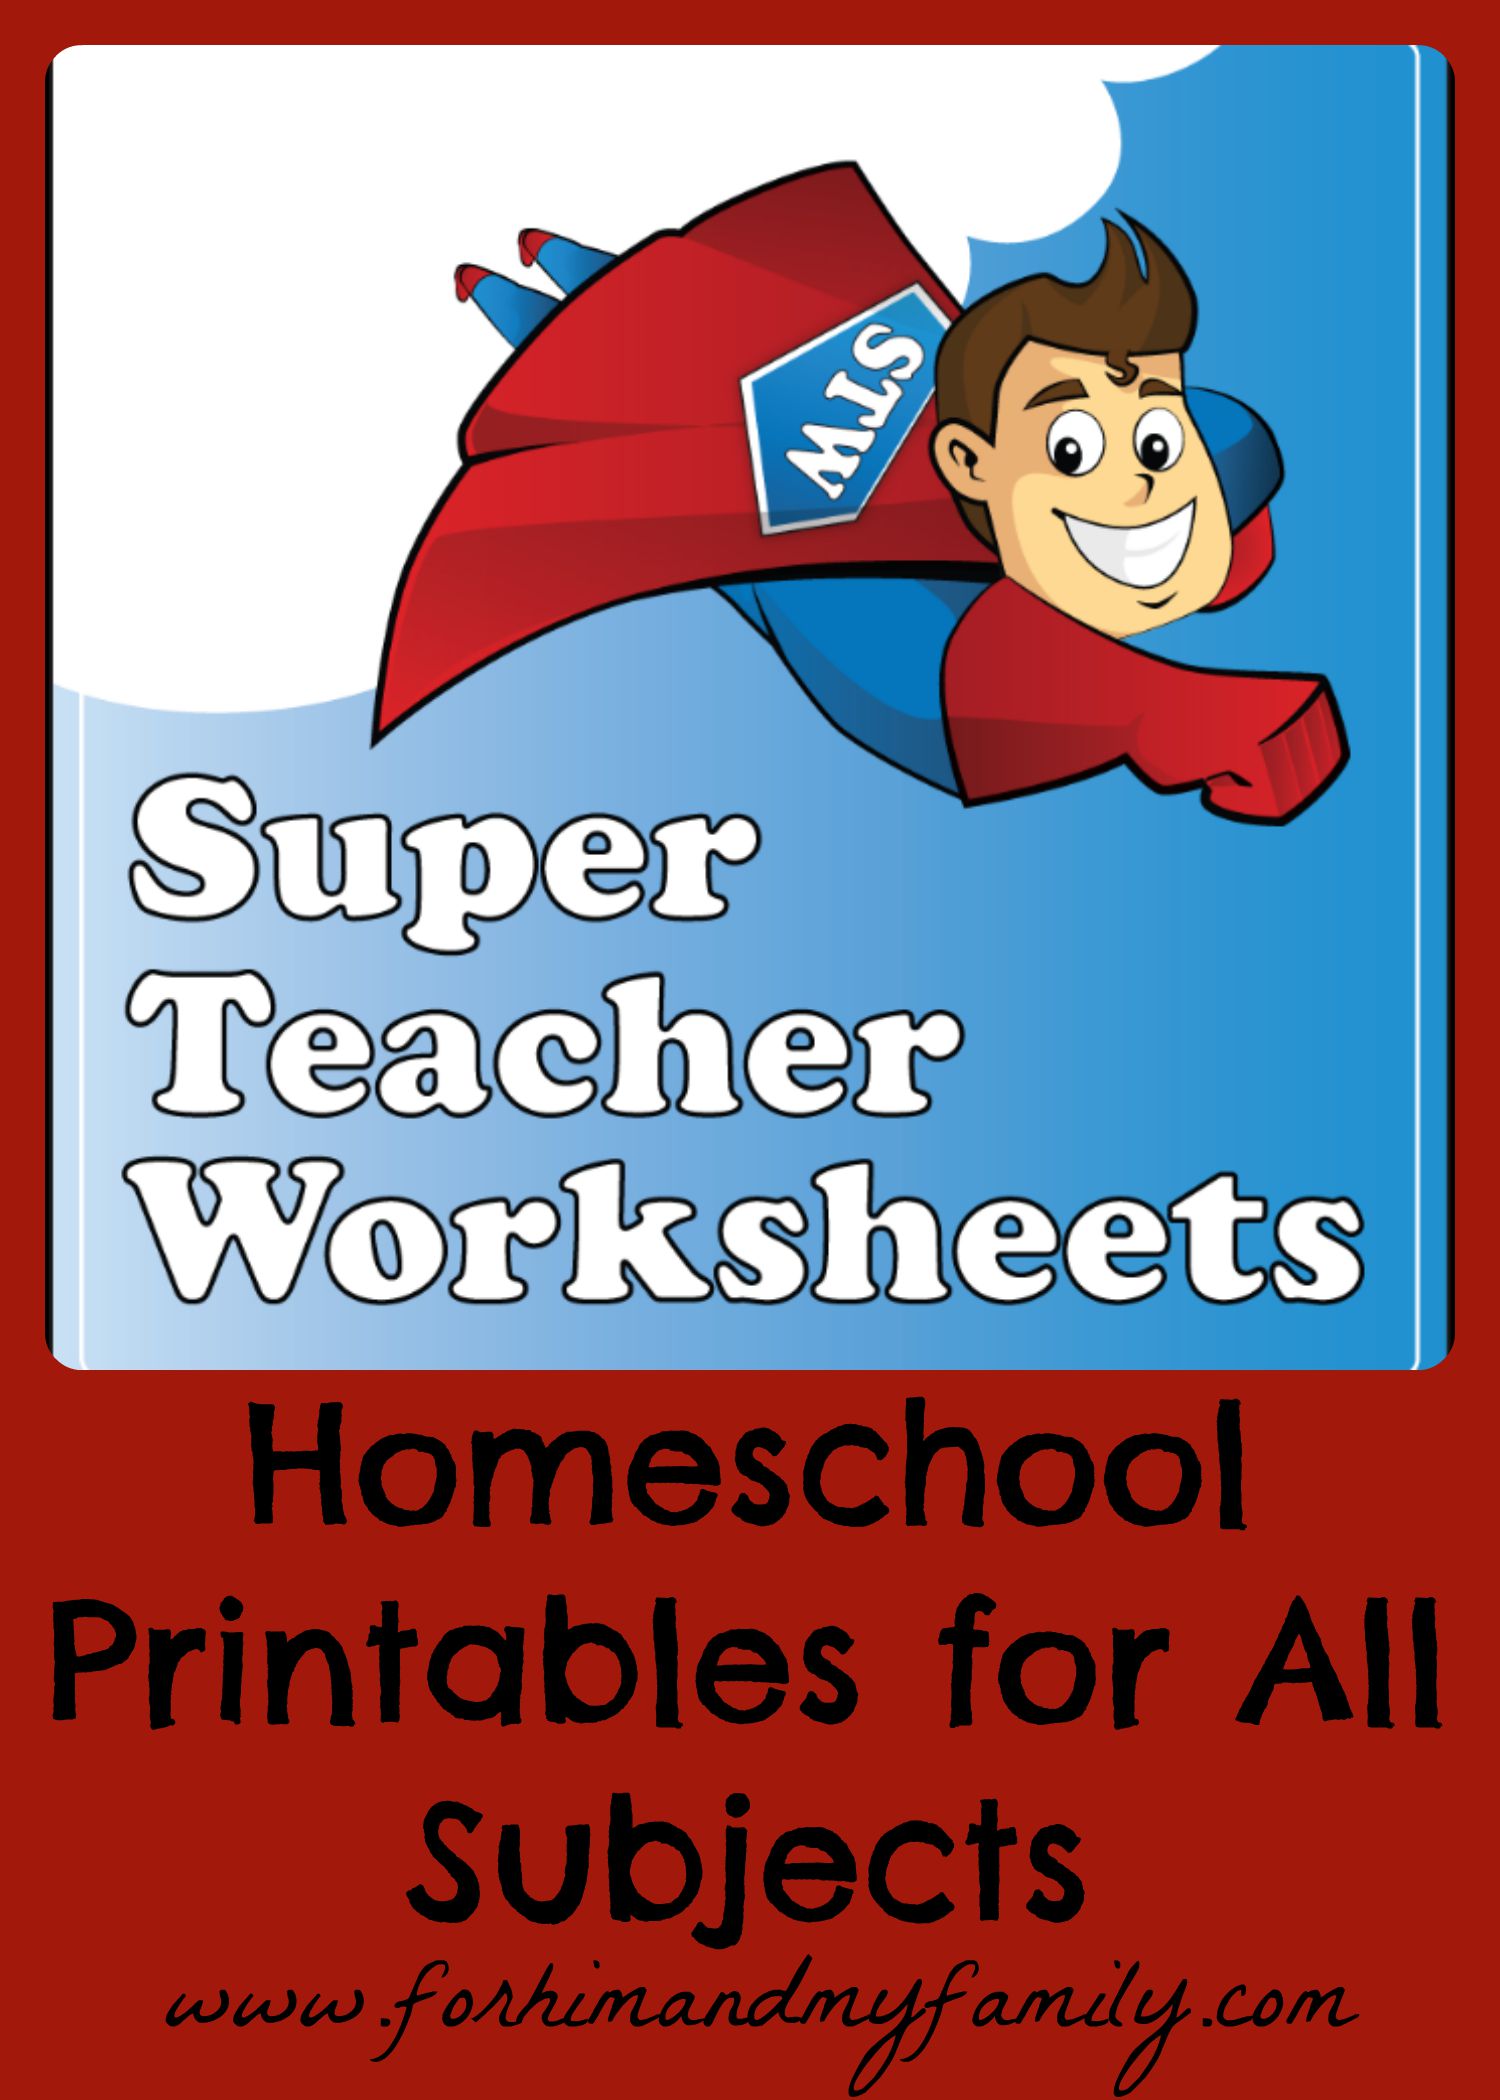 Homeschool Printables for All Subjects